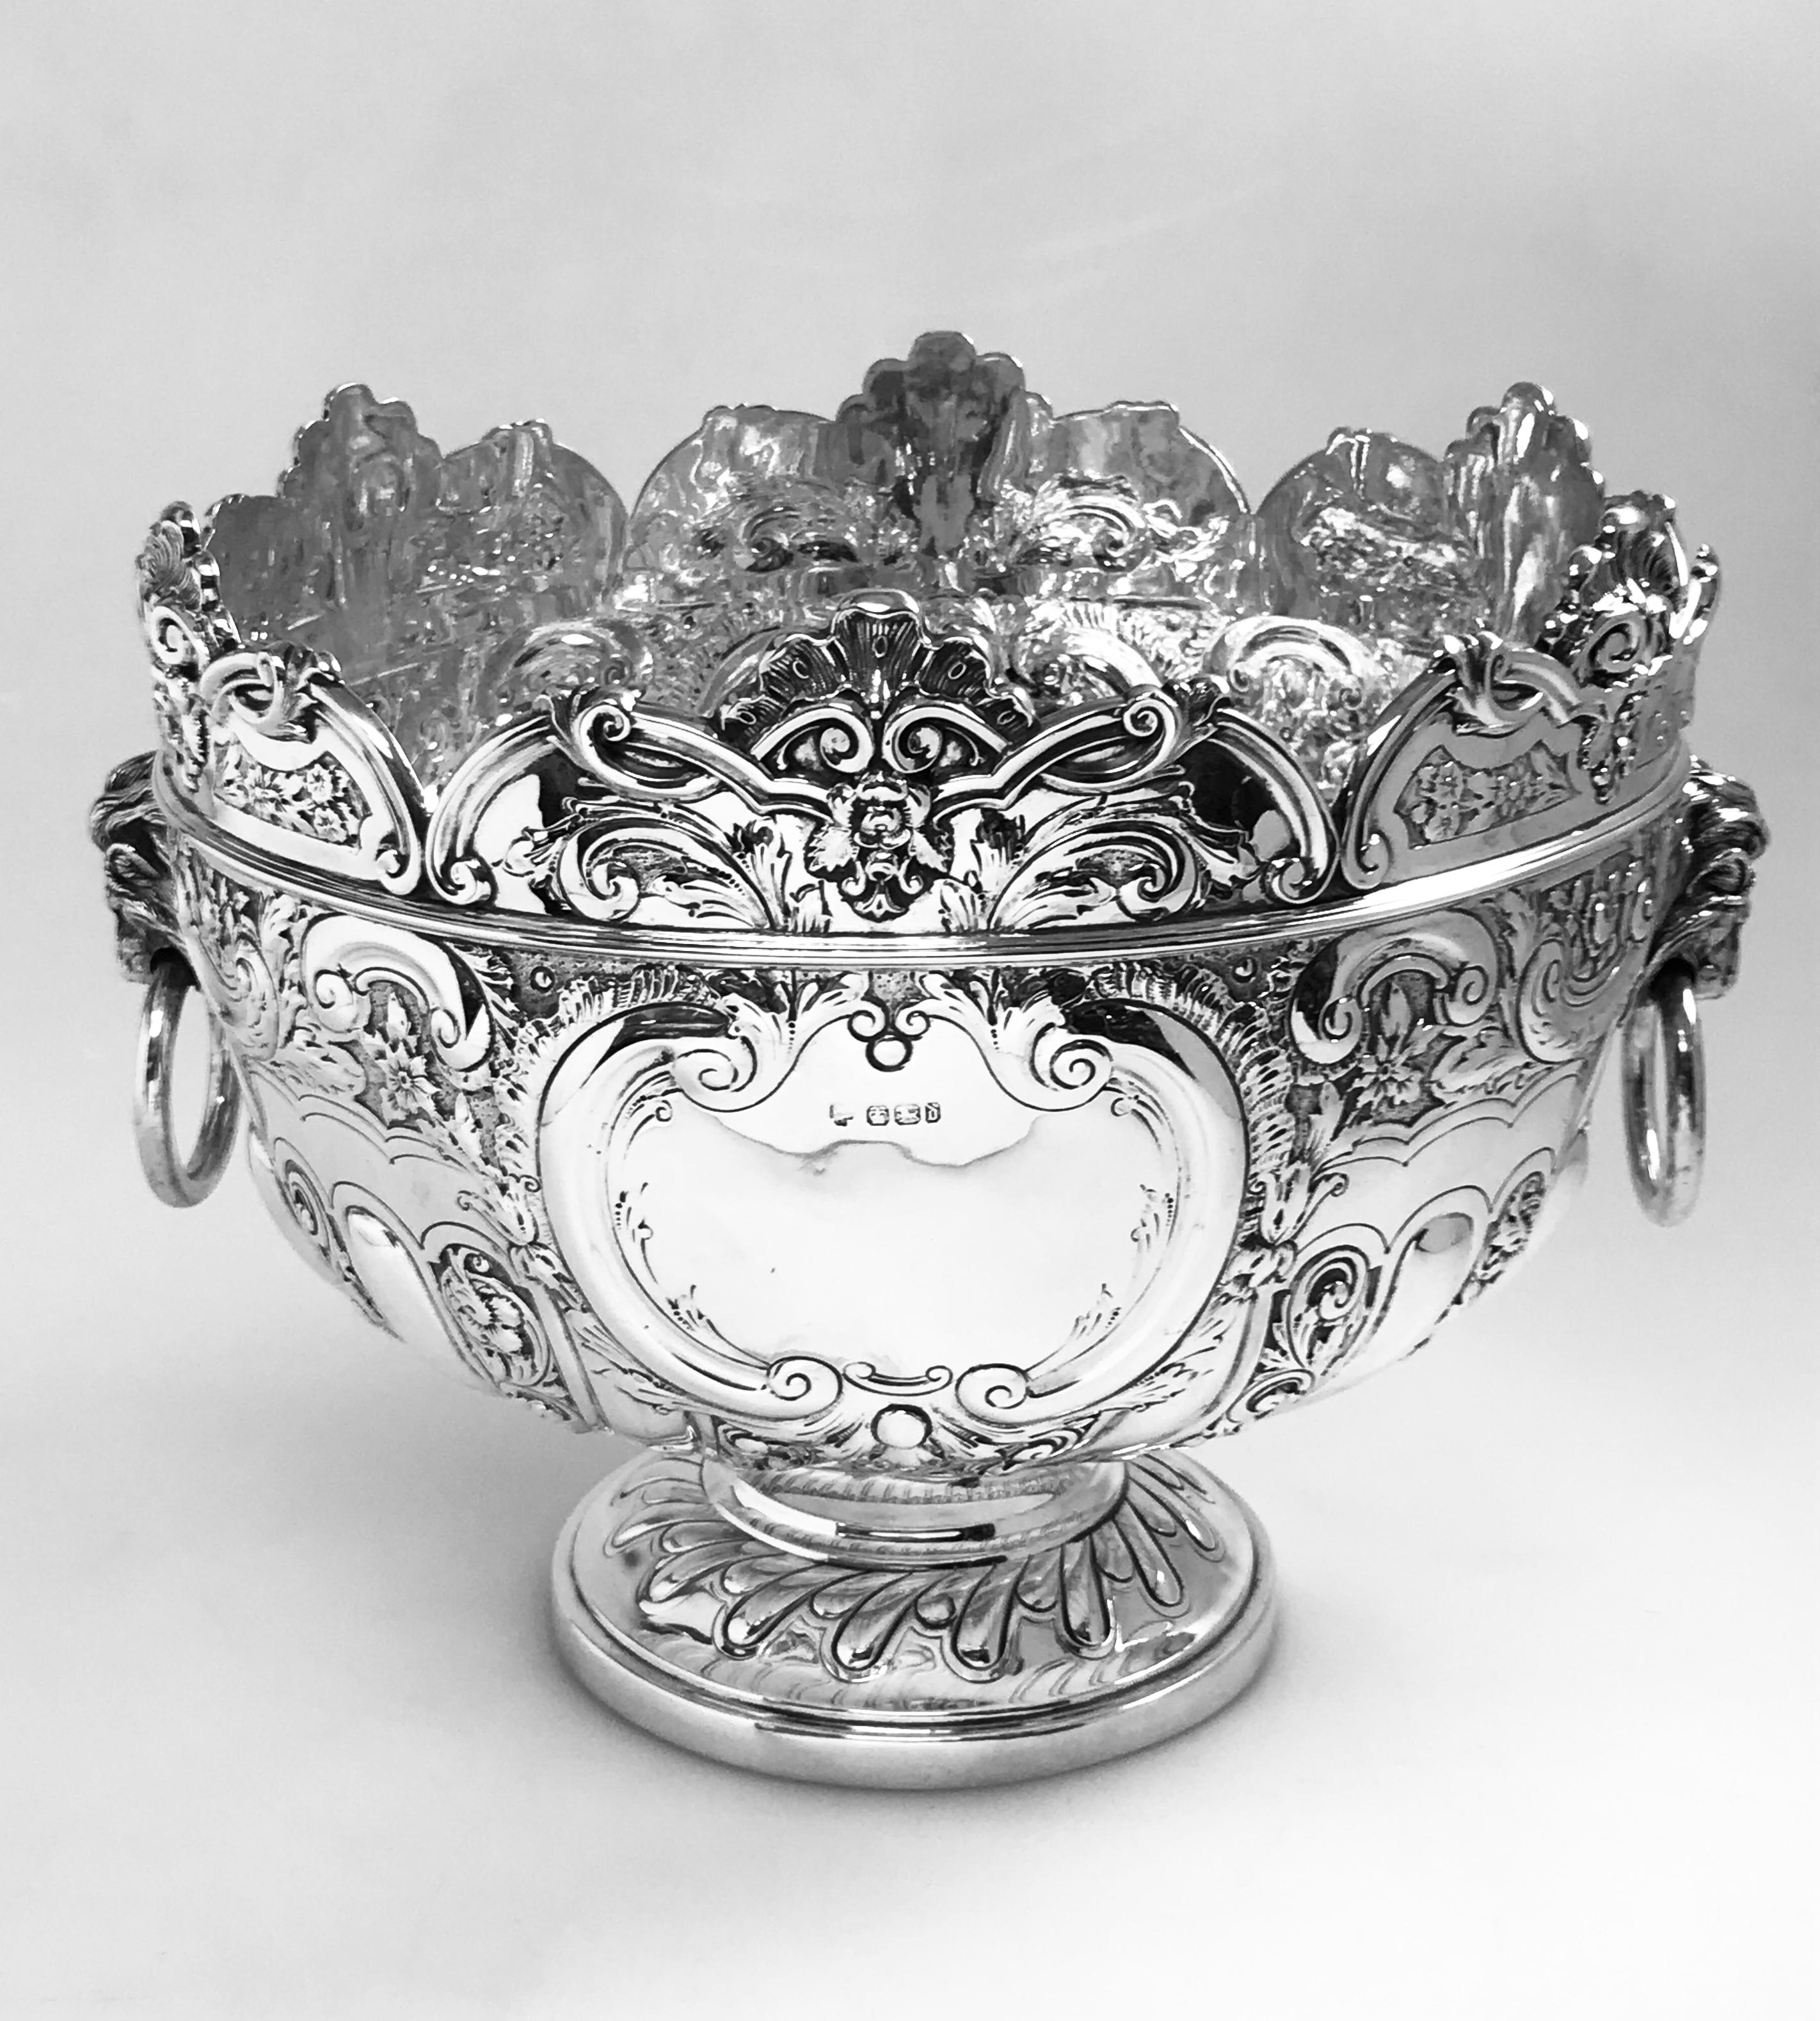 A large and impressive English sterling silver bowl suitable for punch or lots of fruit!
The bowl has a shaped rim, lion-mask ring handles and is beautifully embossed and chased.
Diameter is 31cm
Weight is 2270 gms.